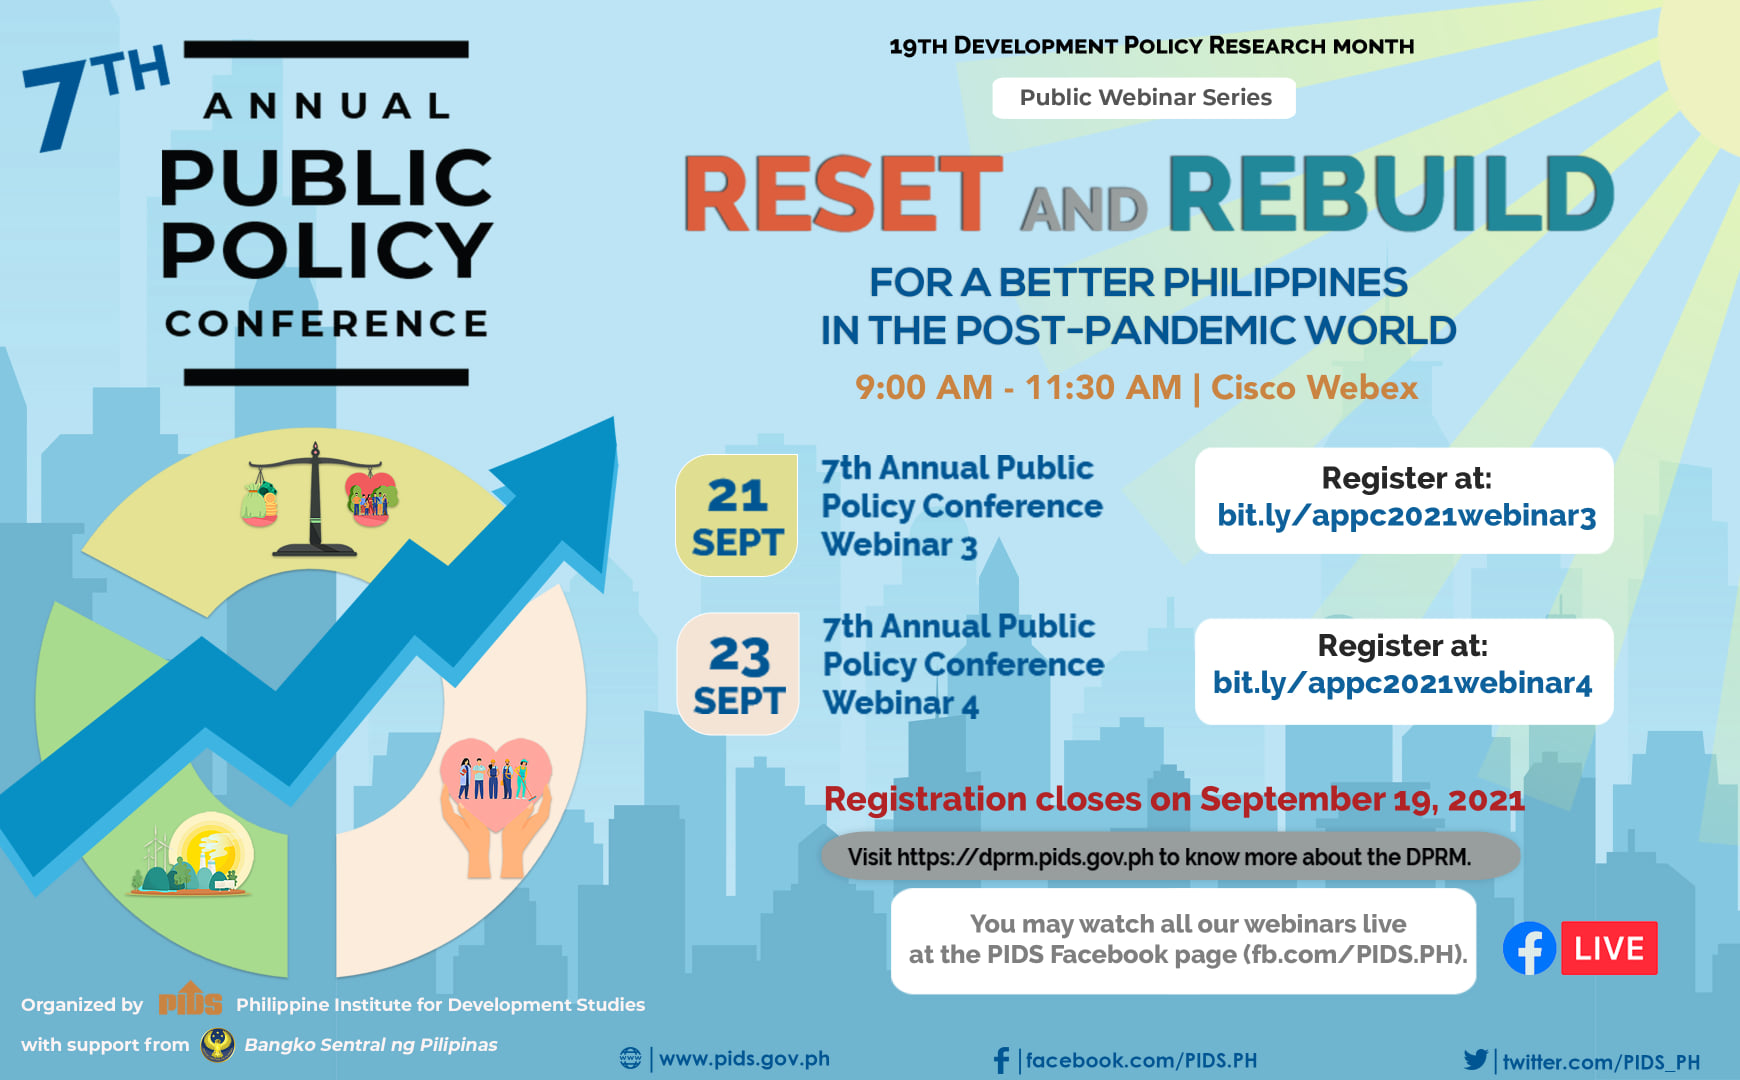 7th Annual Public Policy Conference Webinars 3 and 4